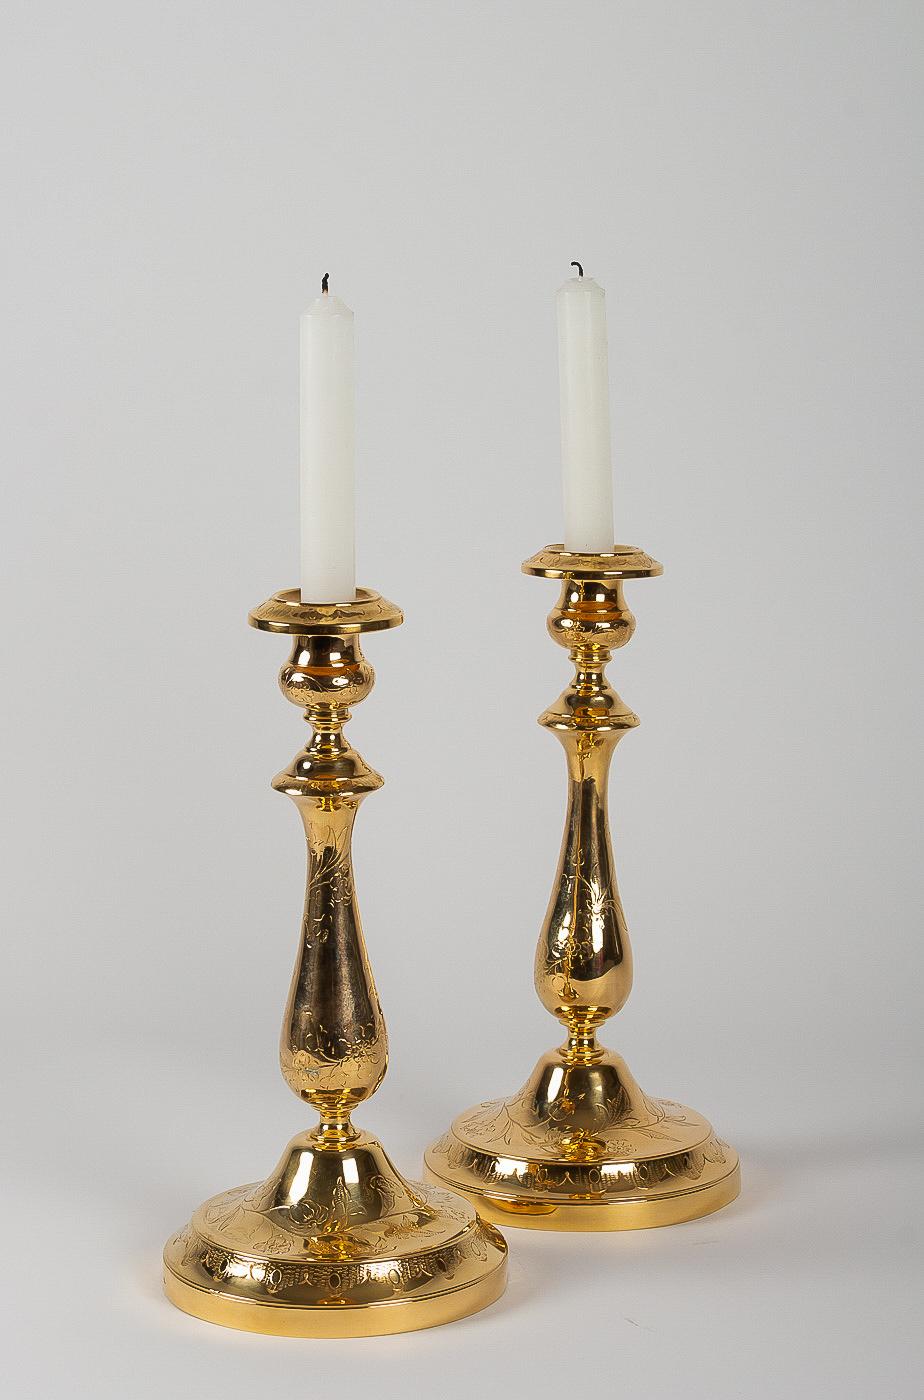 Maison Christofle, 19th-Century Pair of Silvered and Gilted Metal Candlesticks For Sale 5